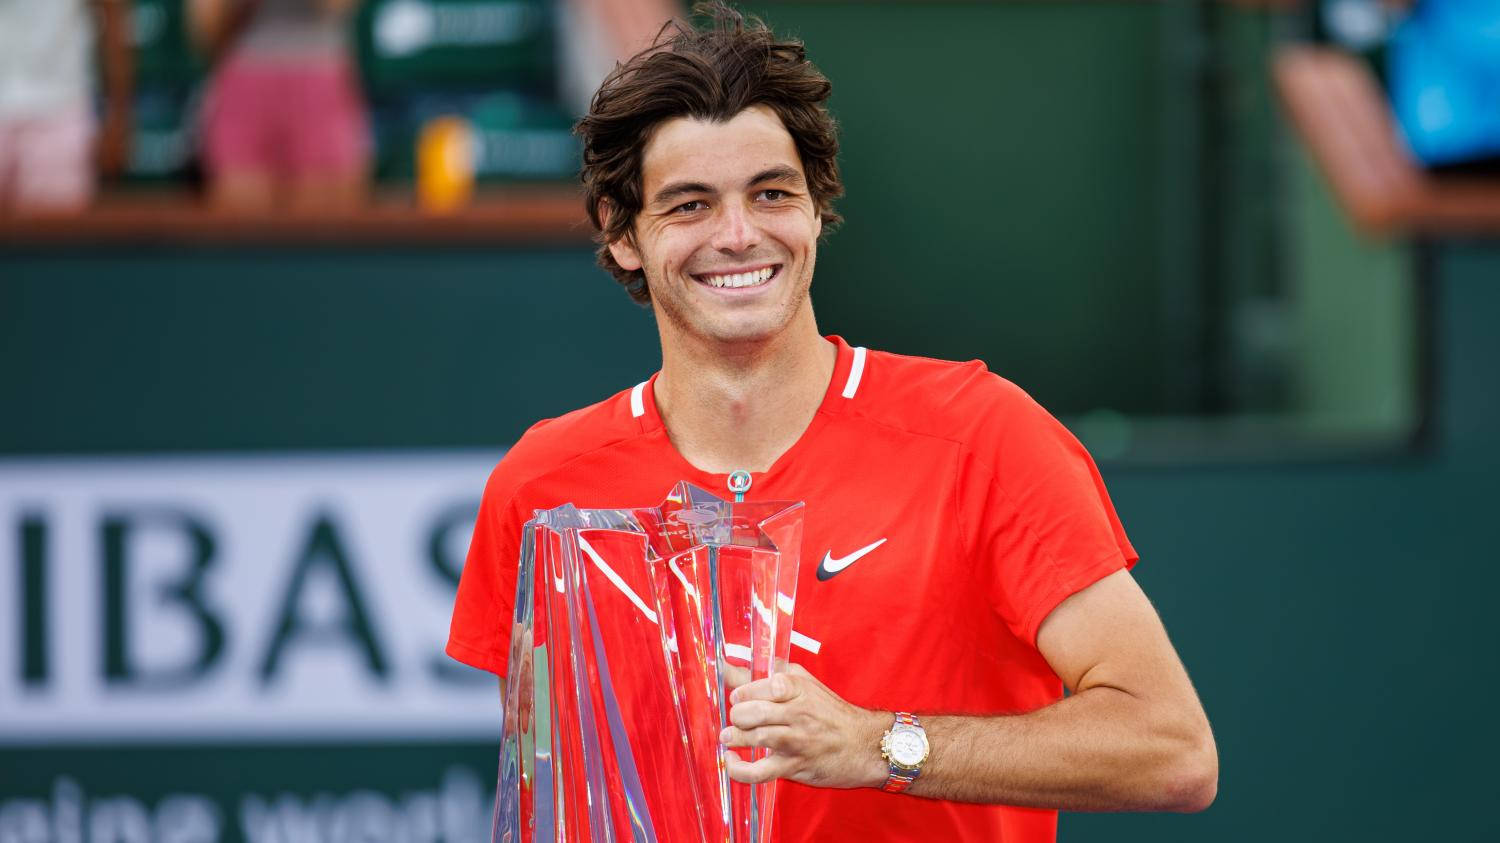 Professional Tennis Player Taylor Fritz Lifting The Tennis Tournament Trophy